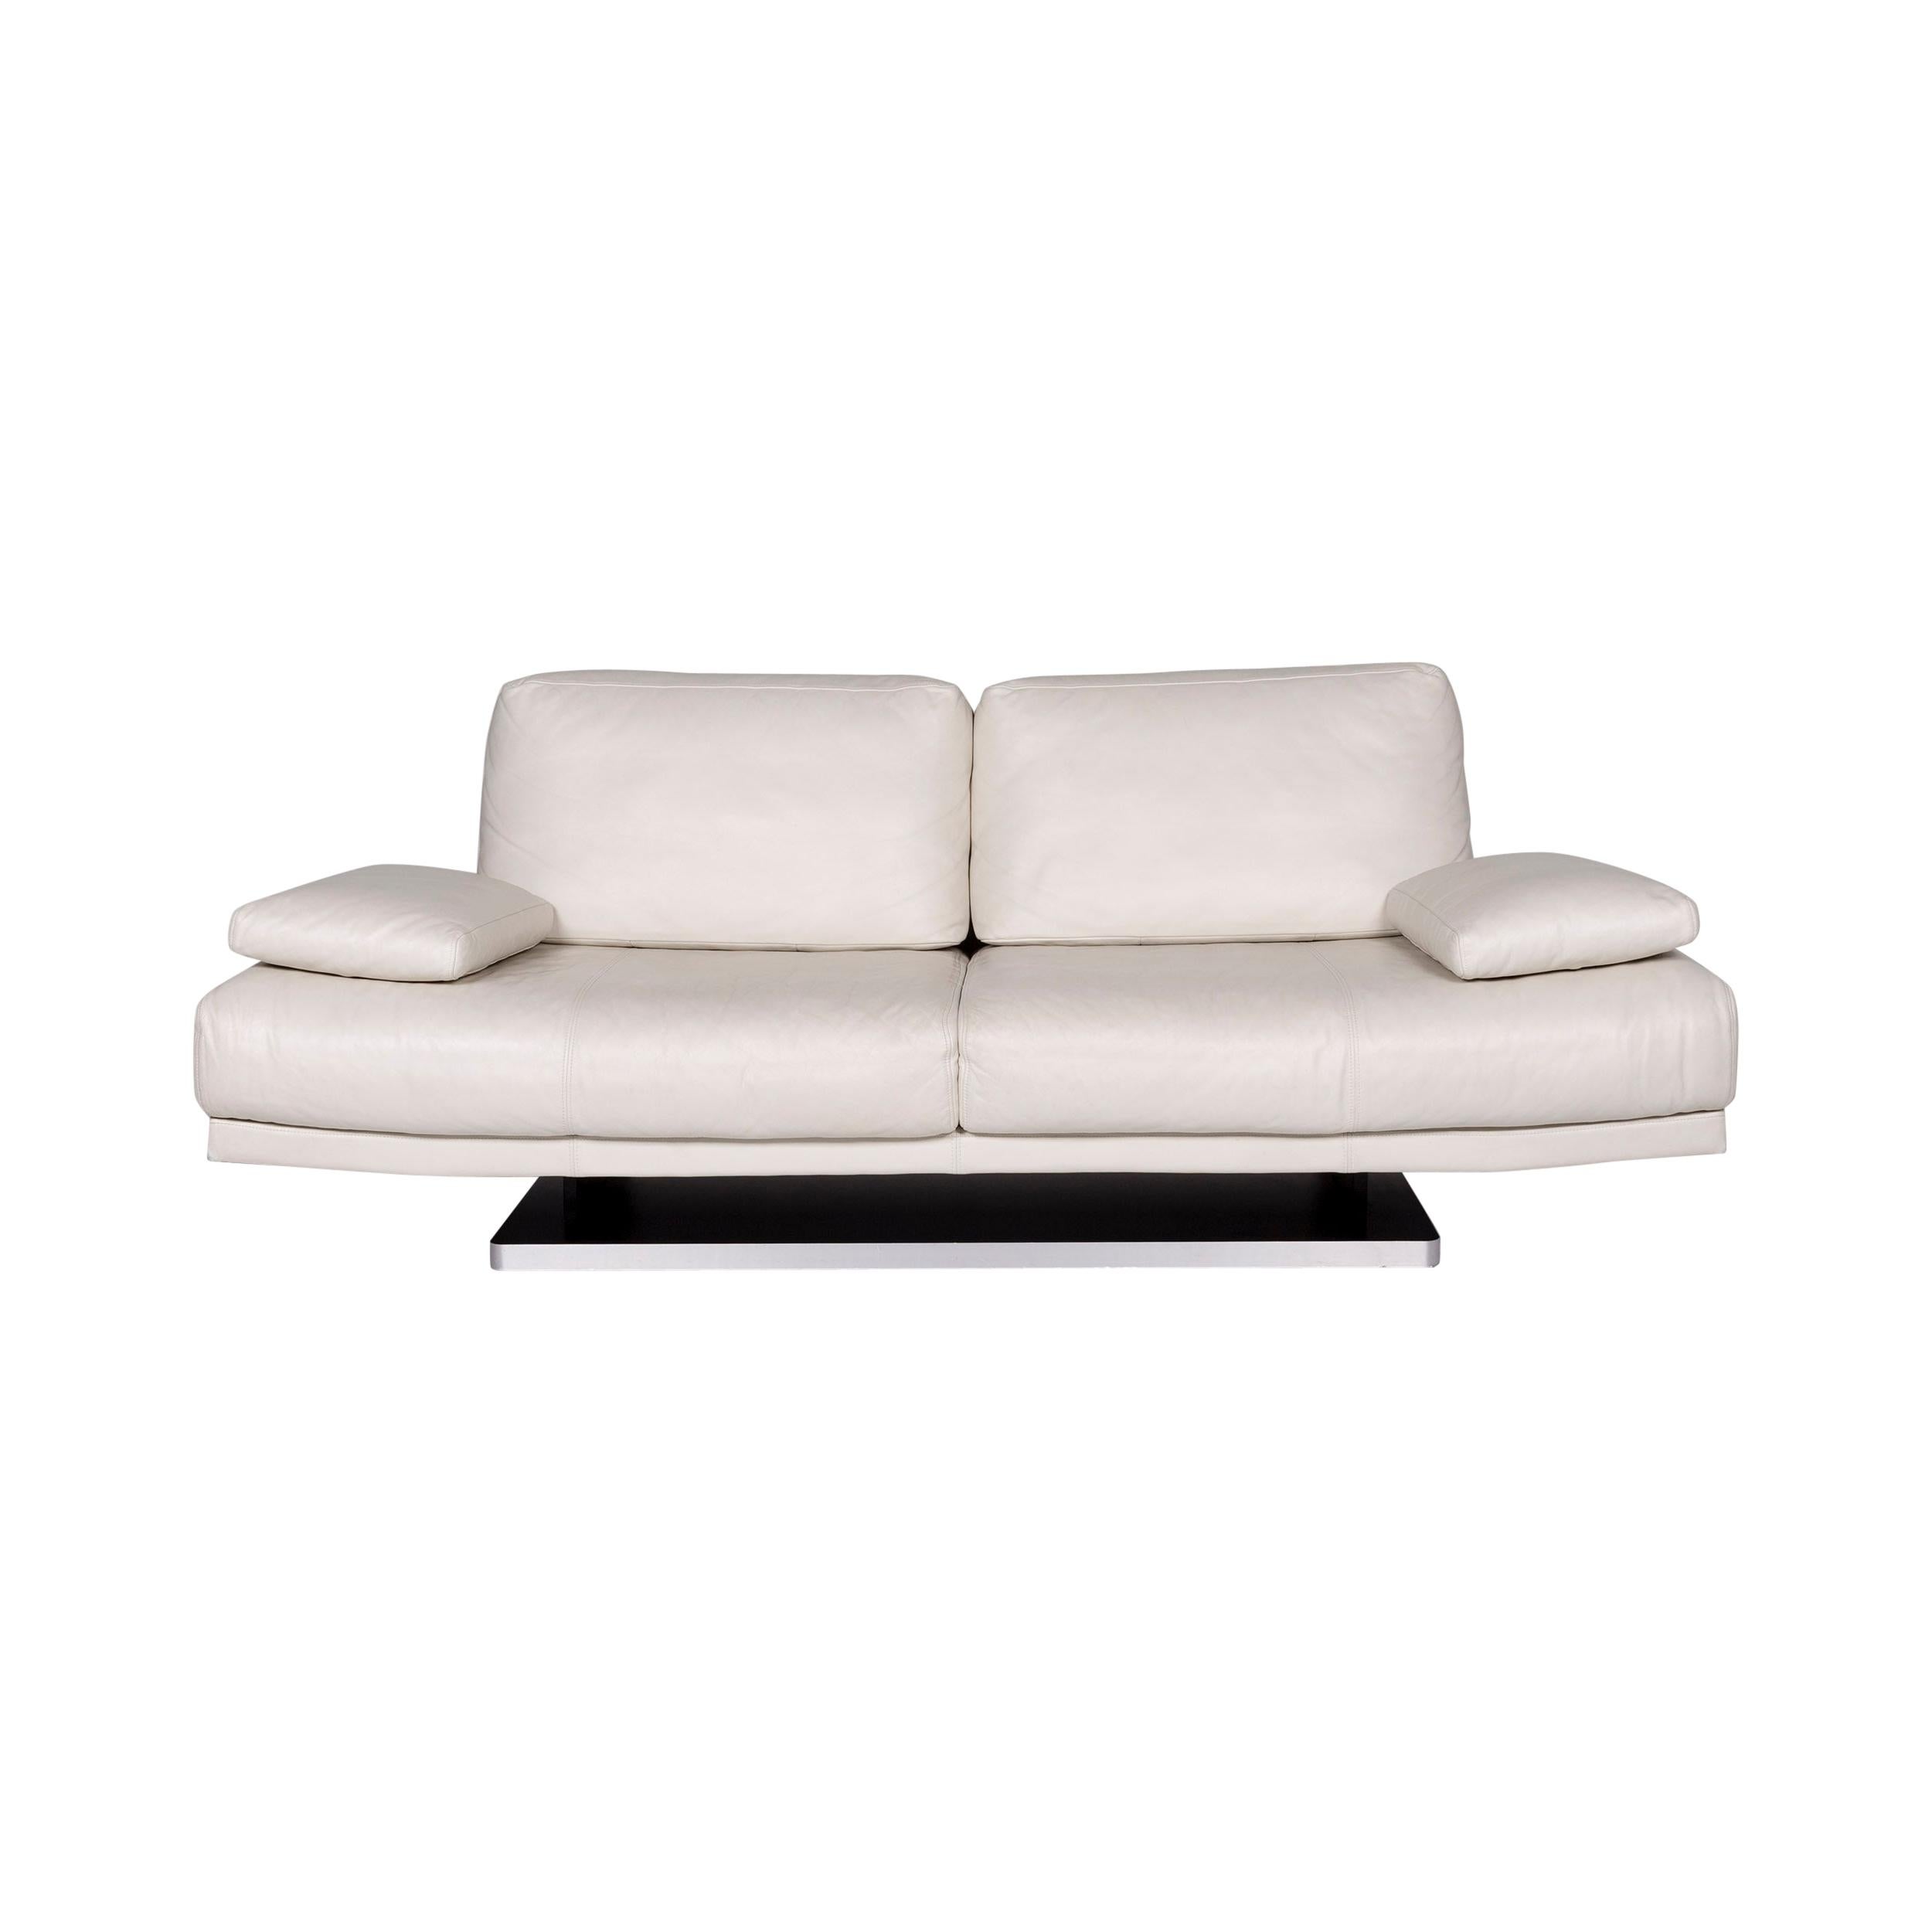 Rolf Benz Rolf Benz 345 Leather Sofa White Two-Seat Couch at 1stDibs | rolf benz  sofa, benz couch, rudolf benz sofa